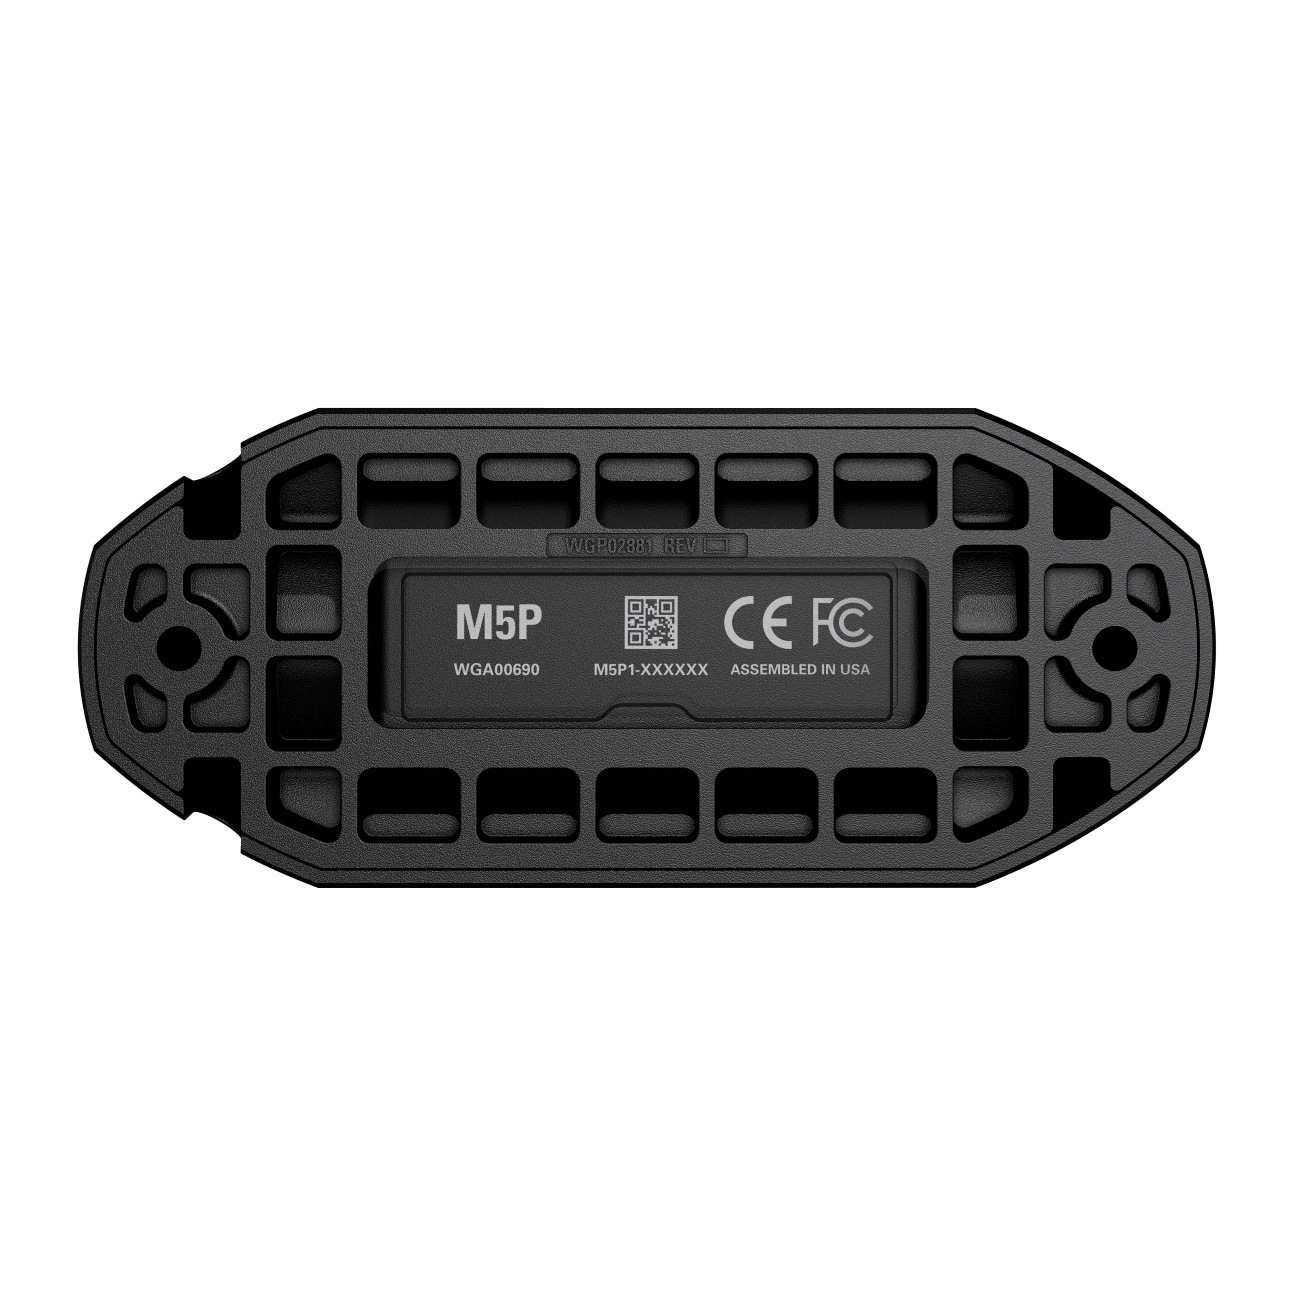 https://www.motorolasolutions.com/content/dam/msi/images/in-car-video-systems/m500/m5p-back.png